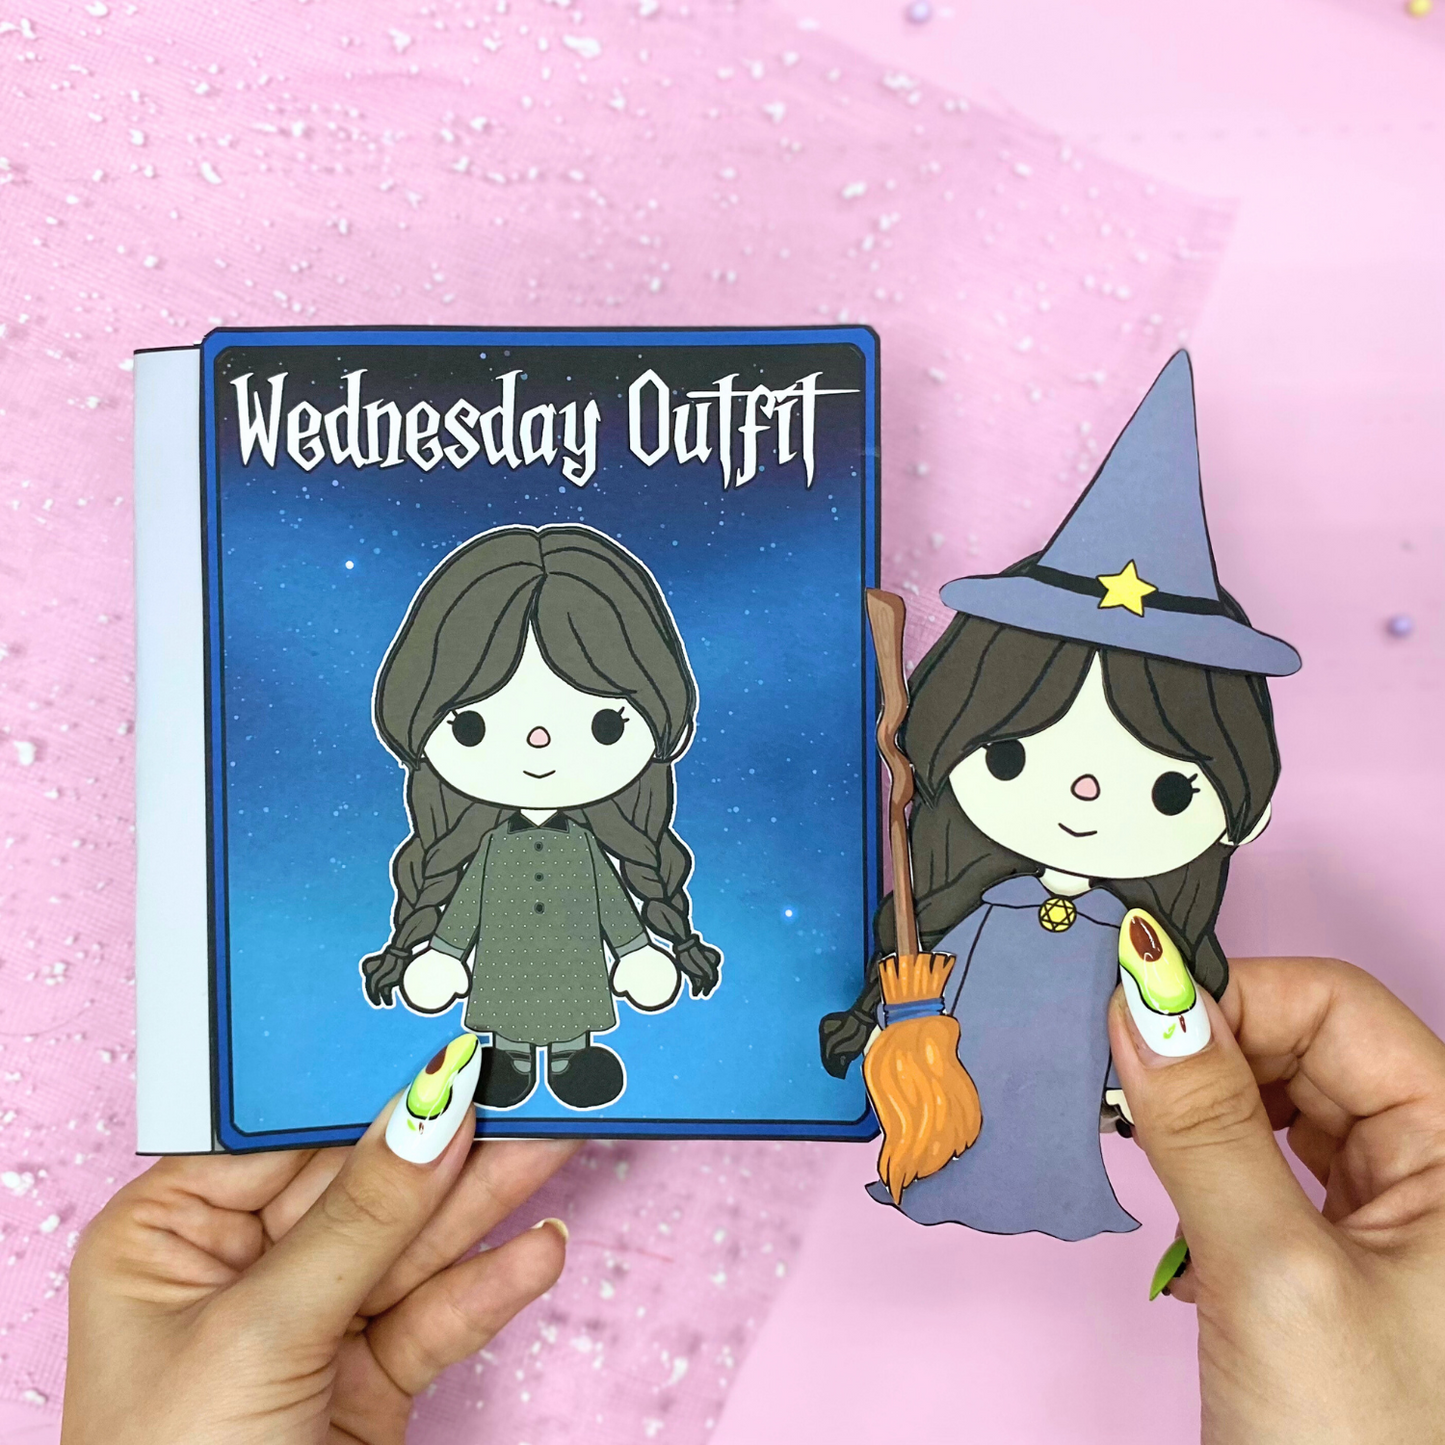 Cute toca Wednesday wardrobe 🌈 Activities book printable | Printable Gothic Dollhouse Busy book | Buy 1 Get 1 Free 🌈 Woa Doll Crafts